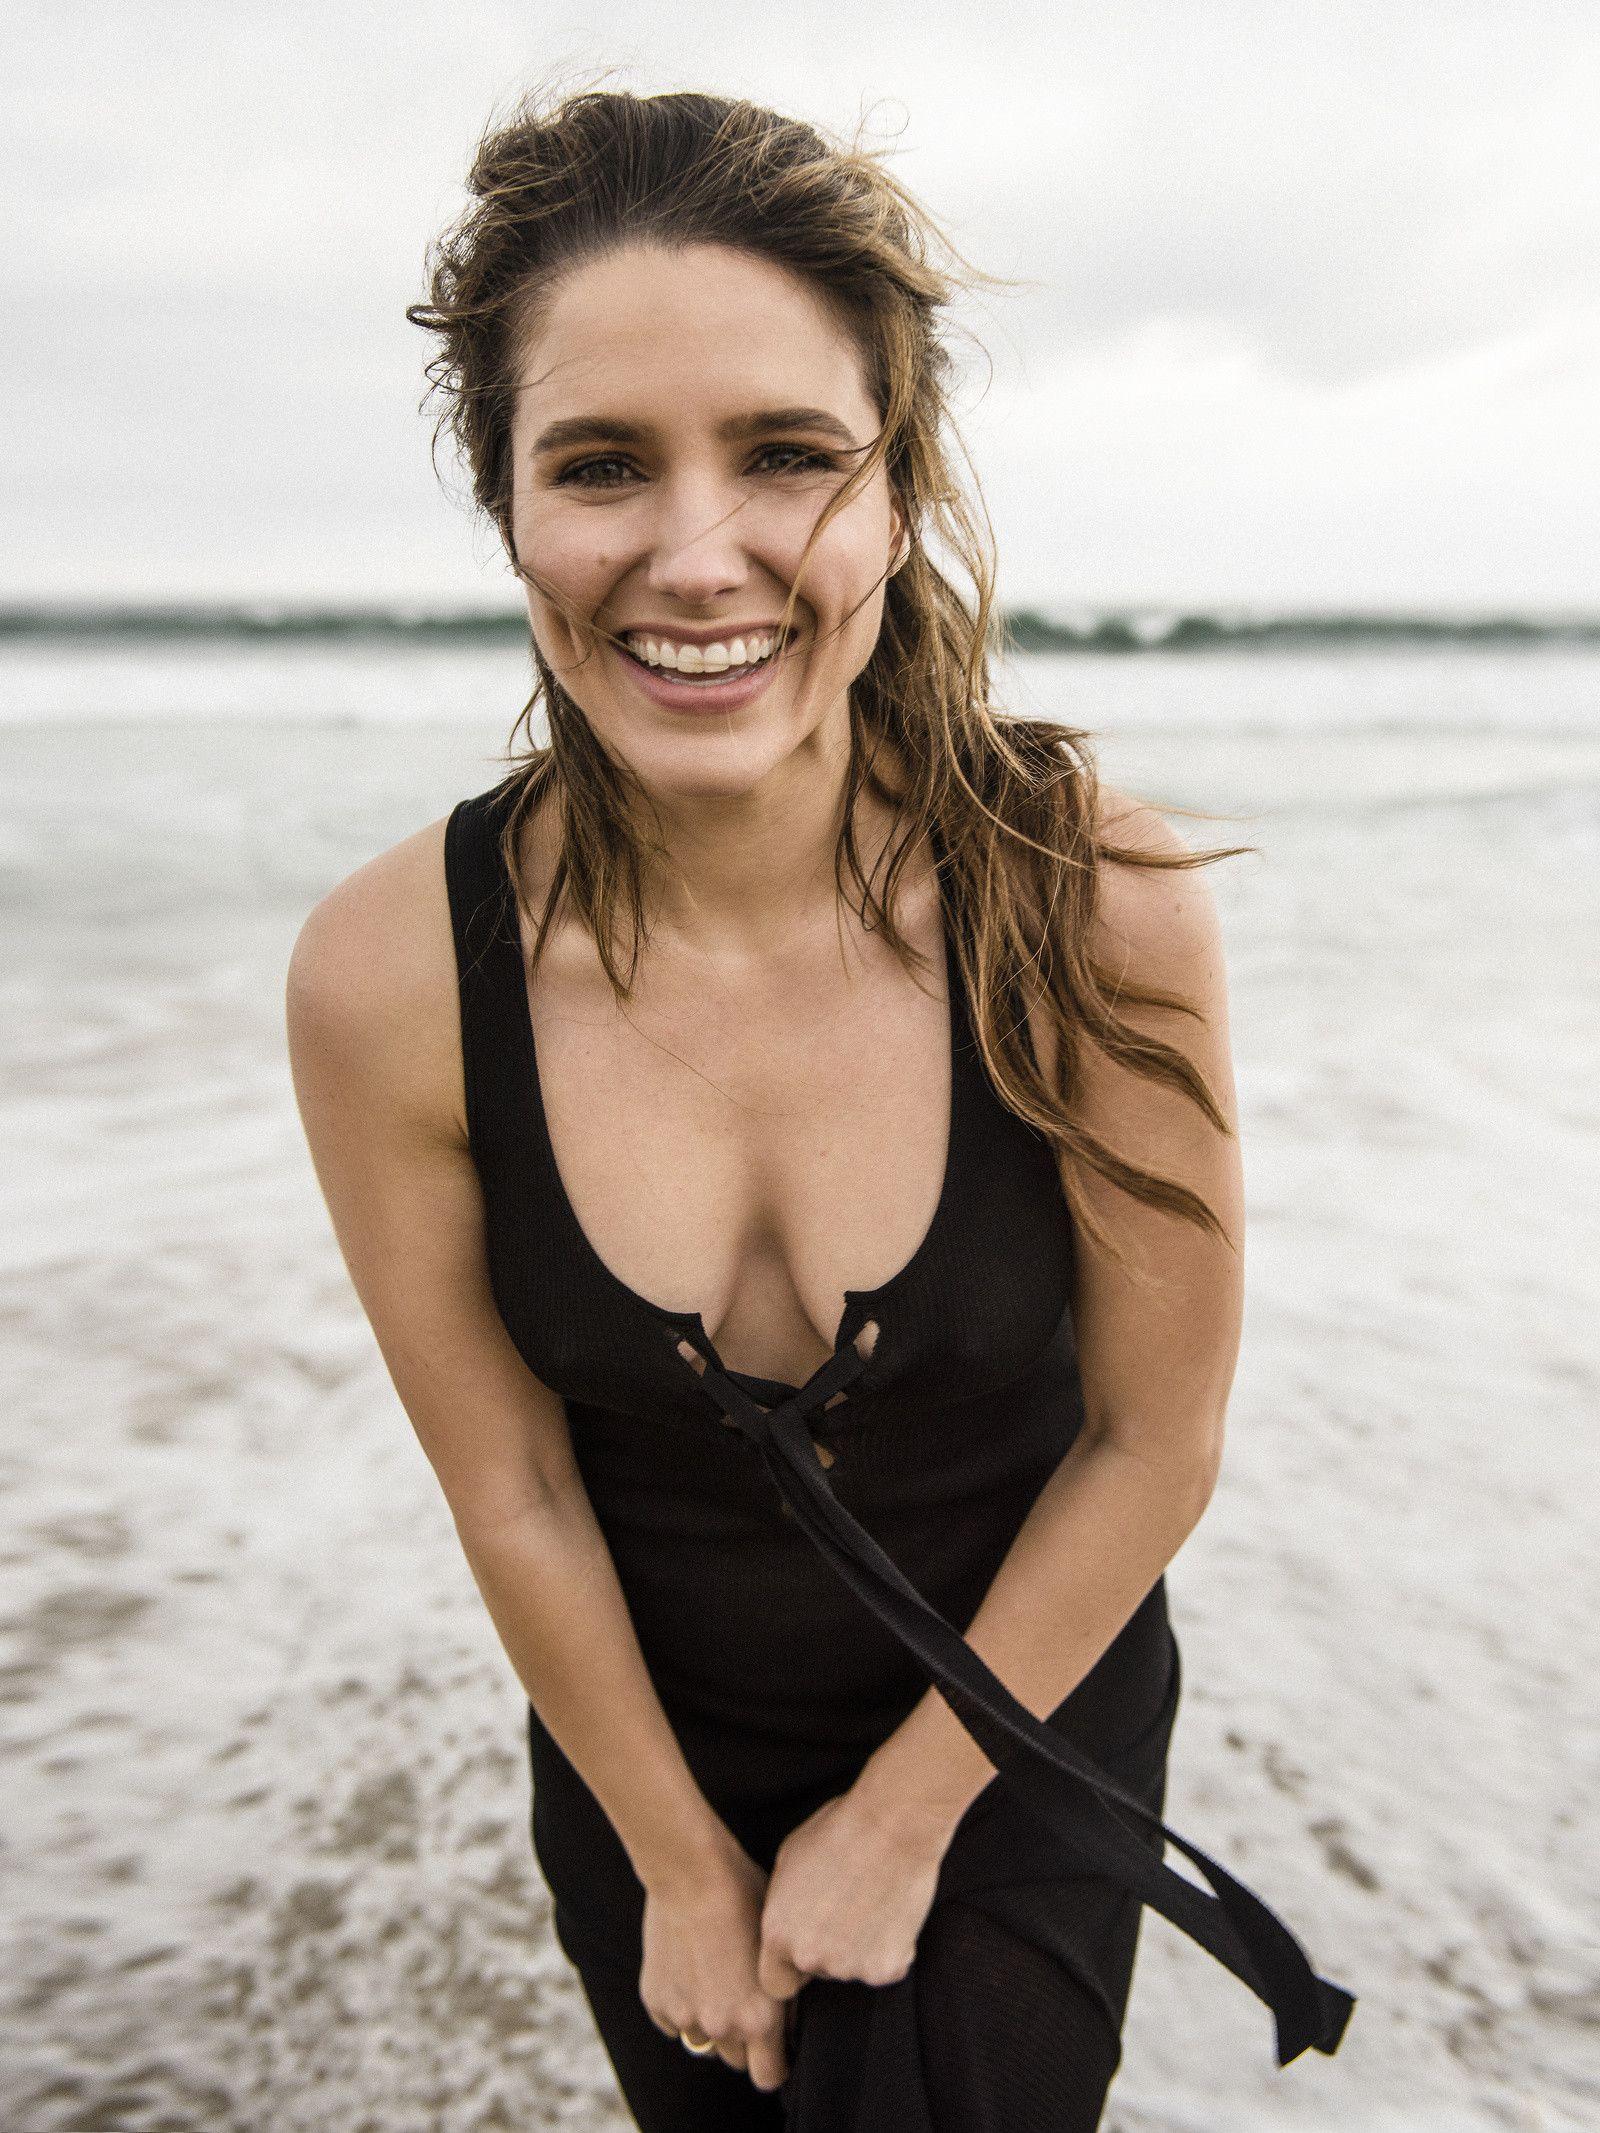 75+ Hot And Sexy Pictures Of Sophia Bush Will Make You Fall In Love With Her | Best Of Comic Books